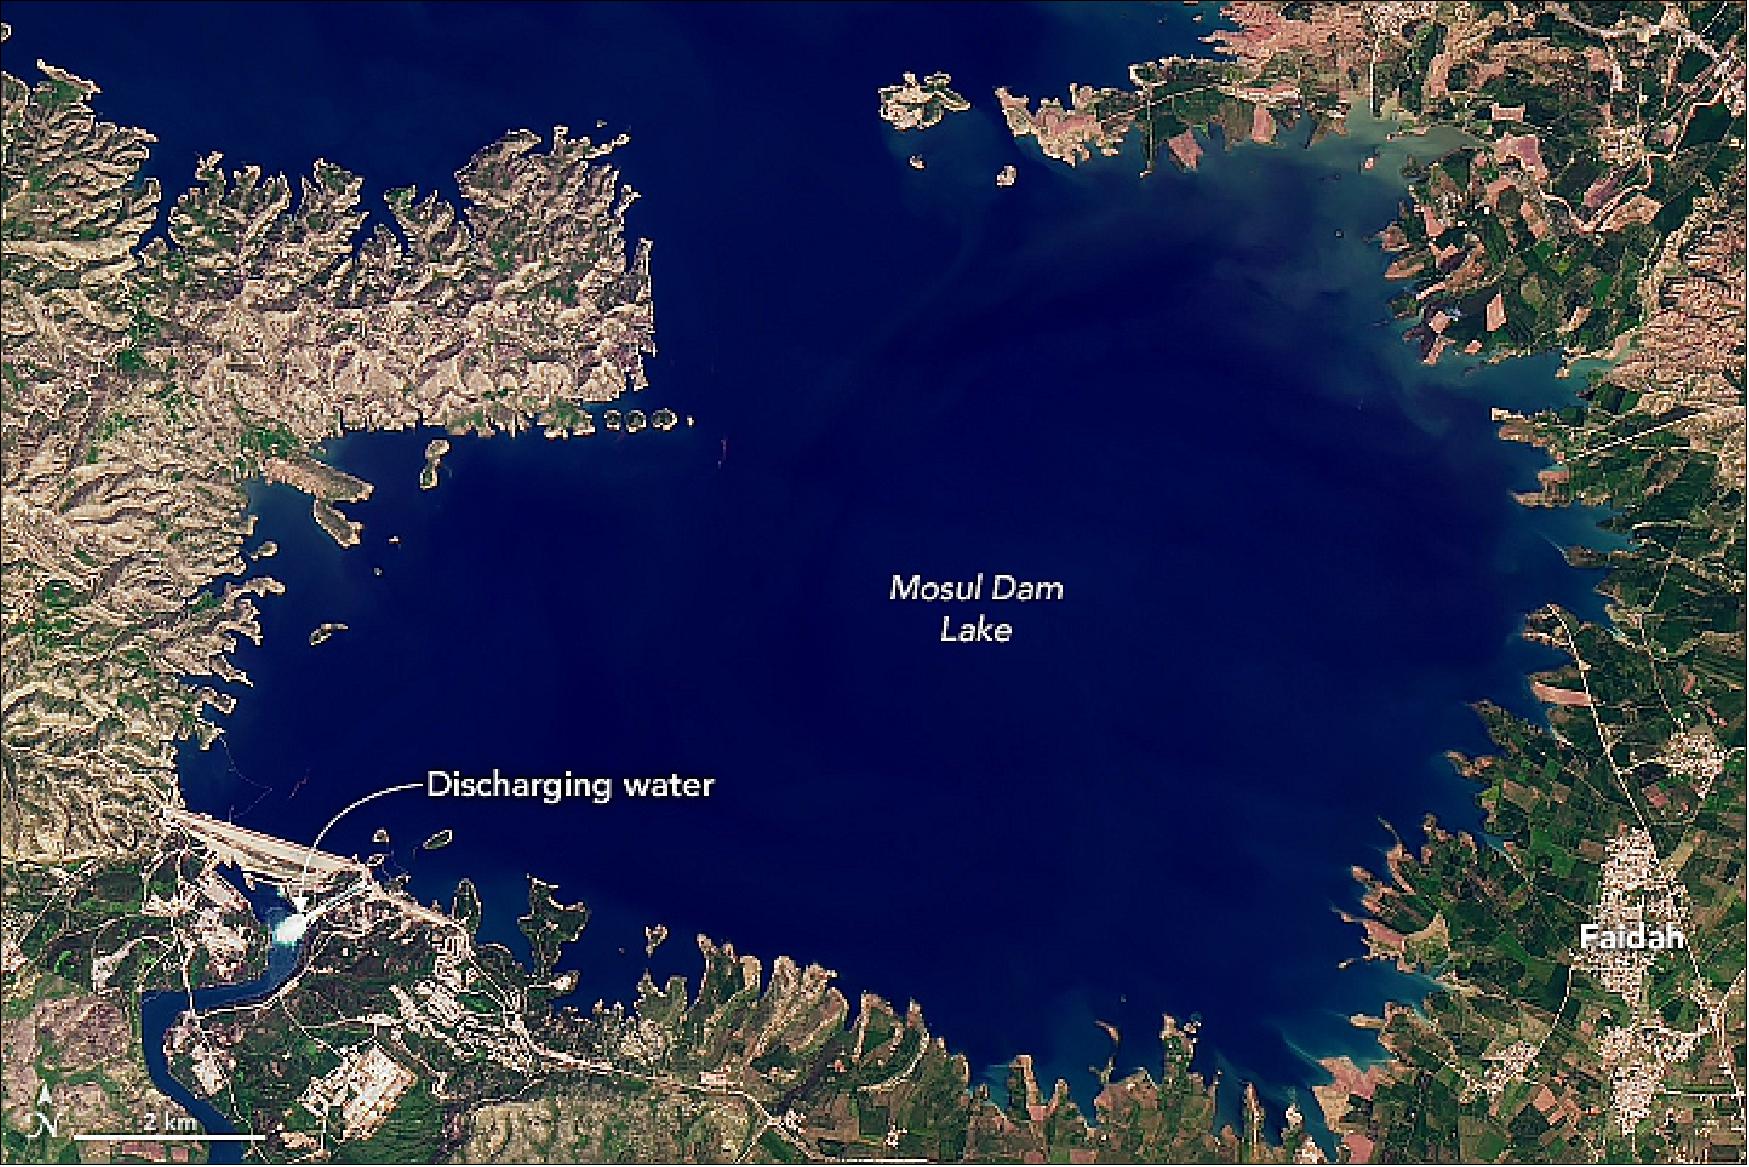 Figure 84: The upstream Mosul Dam Lake image acquired with OLI on Landsat-8 on 04 April 2019 (image credit: NASA Earth Observatory images by Joshua Stevens, using Landsat data from the U.S. Geological Survey, Story by Adam Voiland)